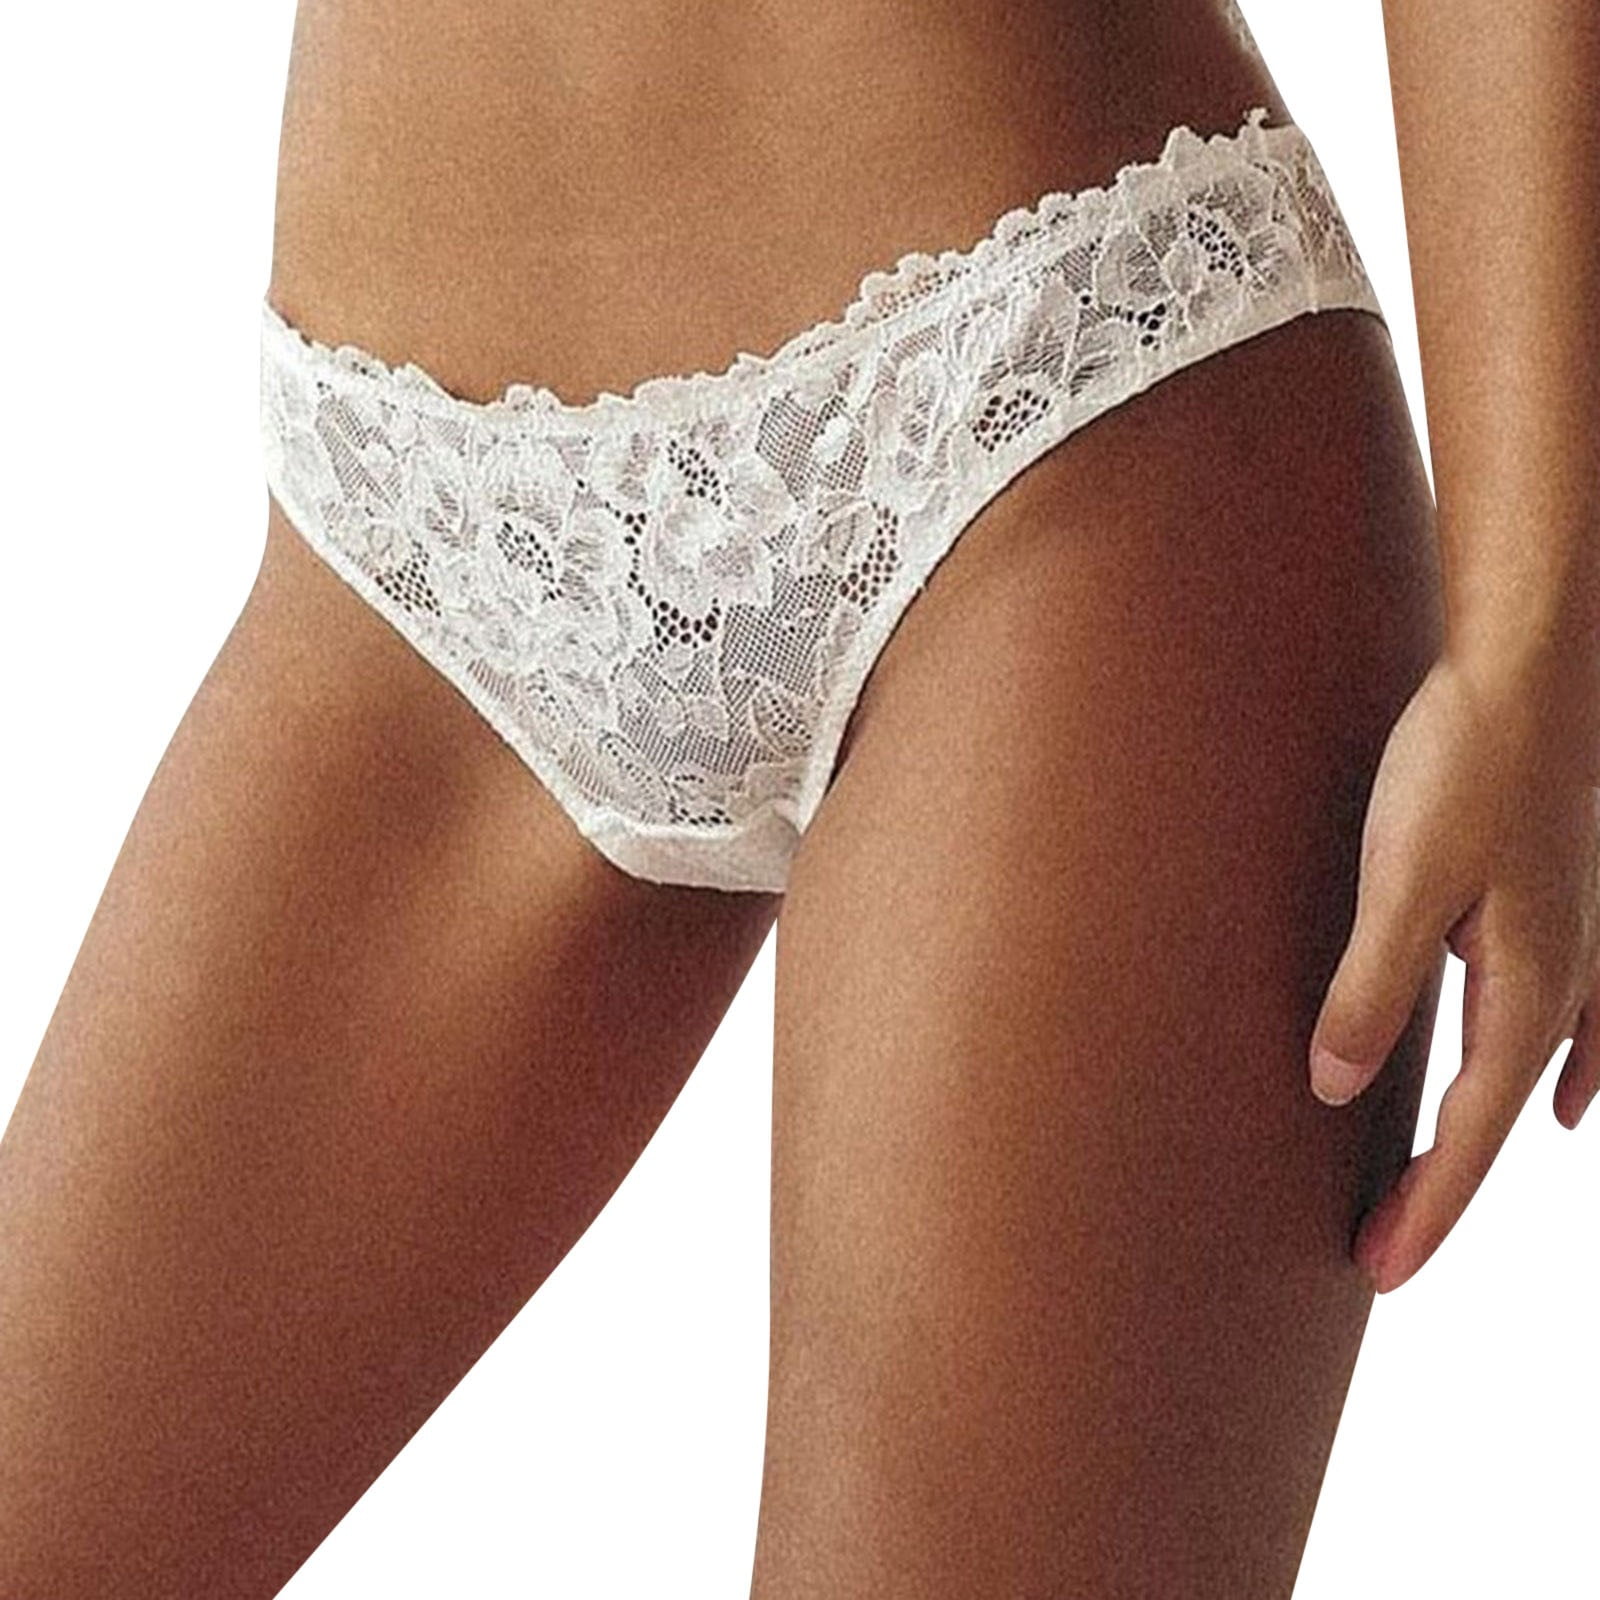 Uuszgmr Womens Lingeries Lace Floral Crochet Lace Rhinestone Underwear  Panty For Wedding Night,Romantic Valentine'S Day And Every Hot Sweet  Night,Size：M-L 